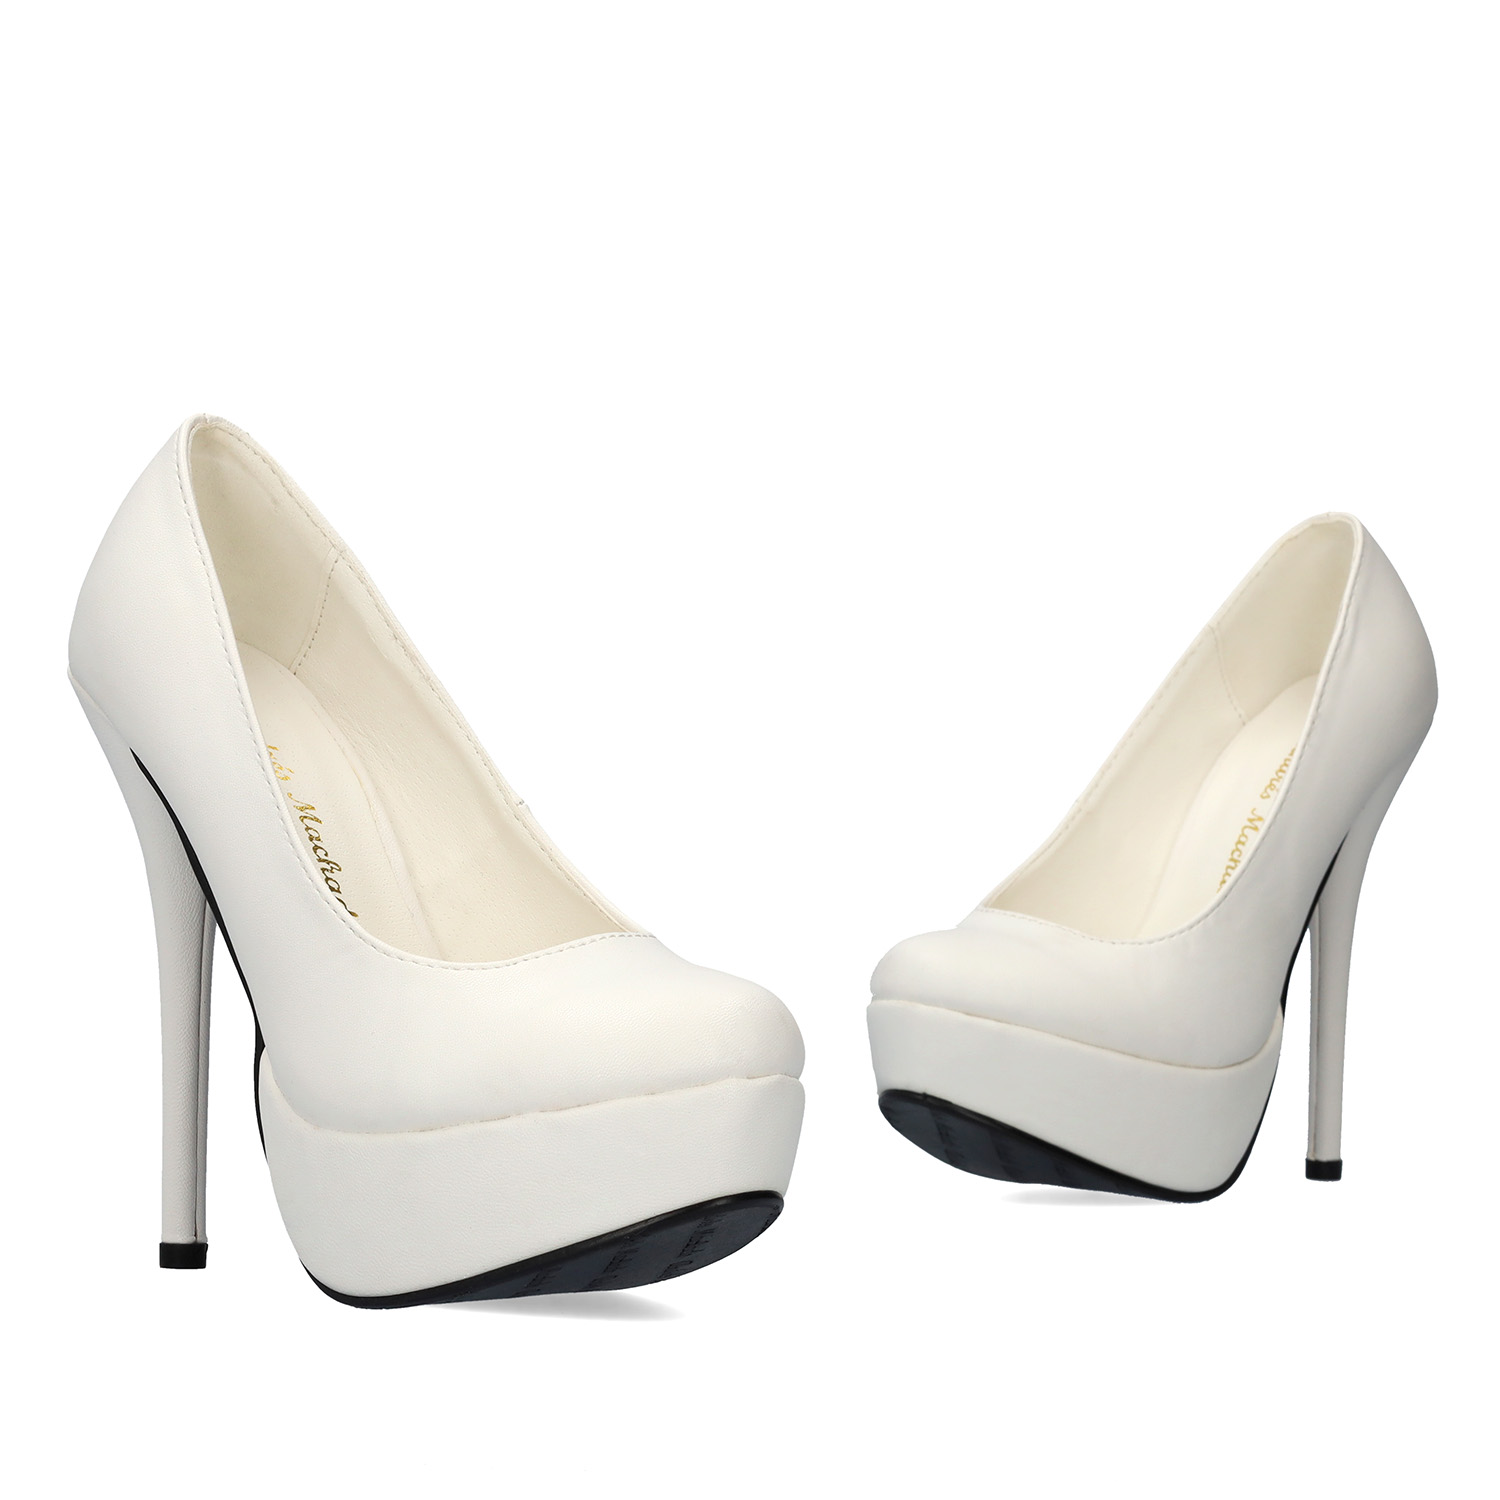 White faux Leather Platform Pumps with Stiletto Heel 